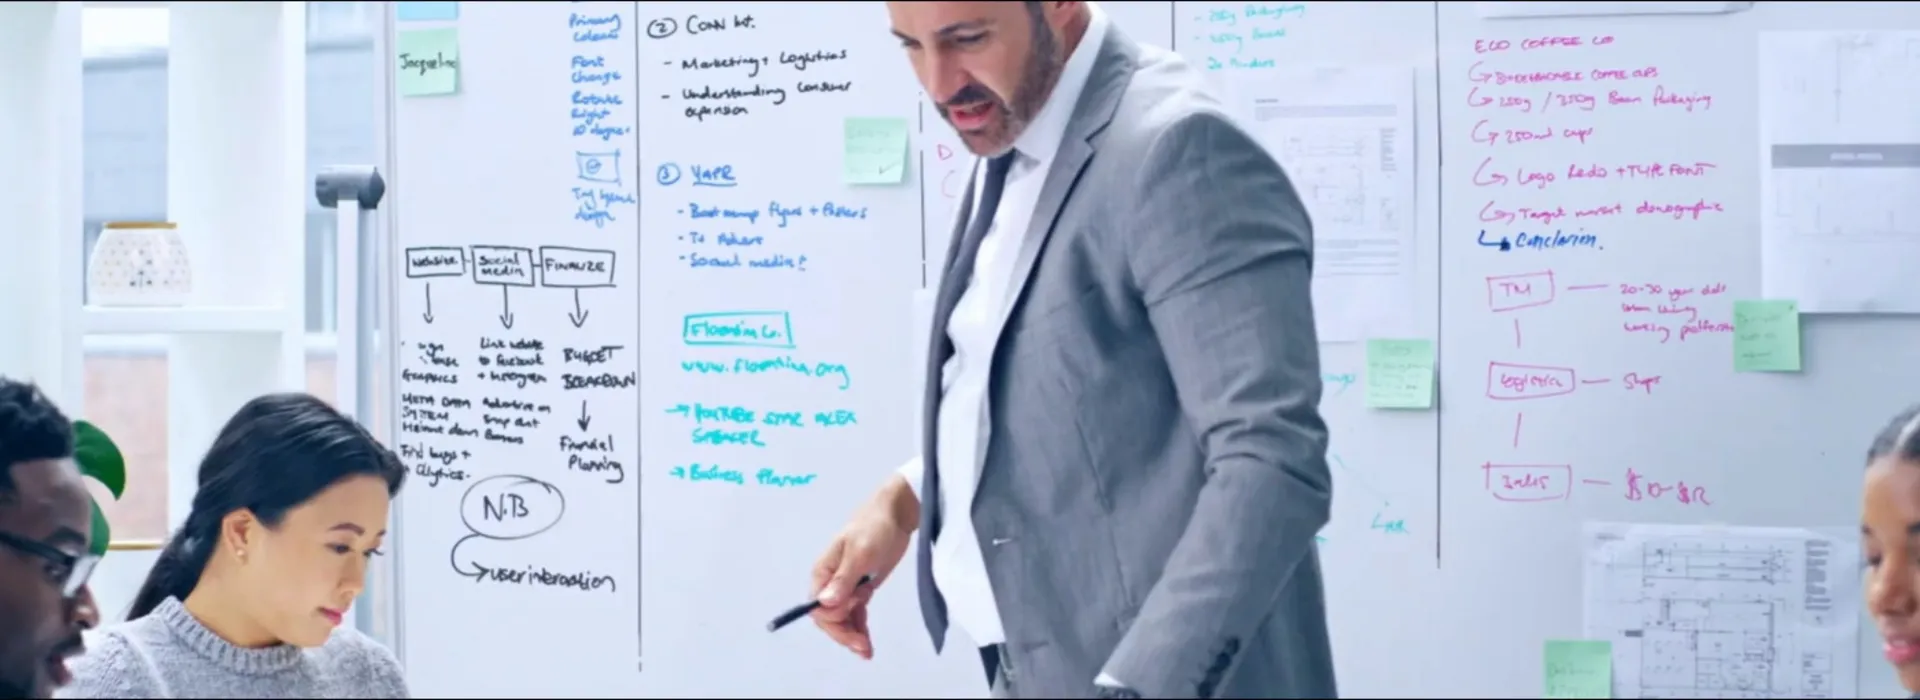 Still of professionals in an office setting, who appear to be collaborating on a marketing project. There is a whiteboard in the background with different tasks written in a variety of colors.